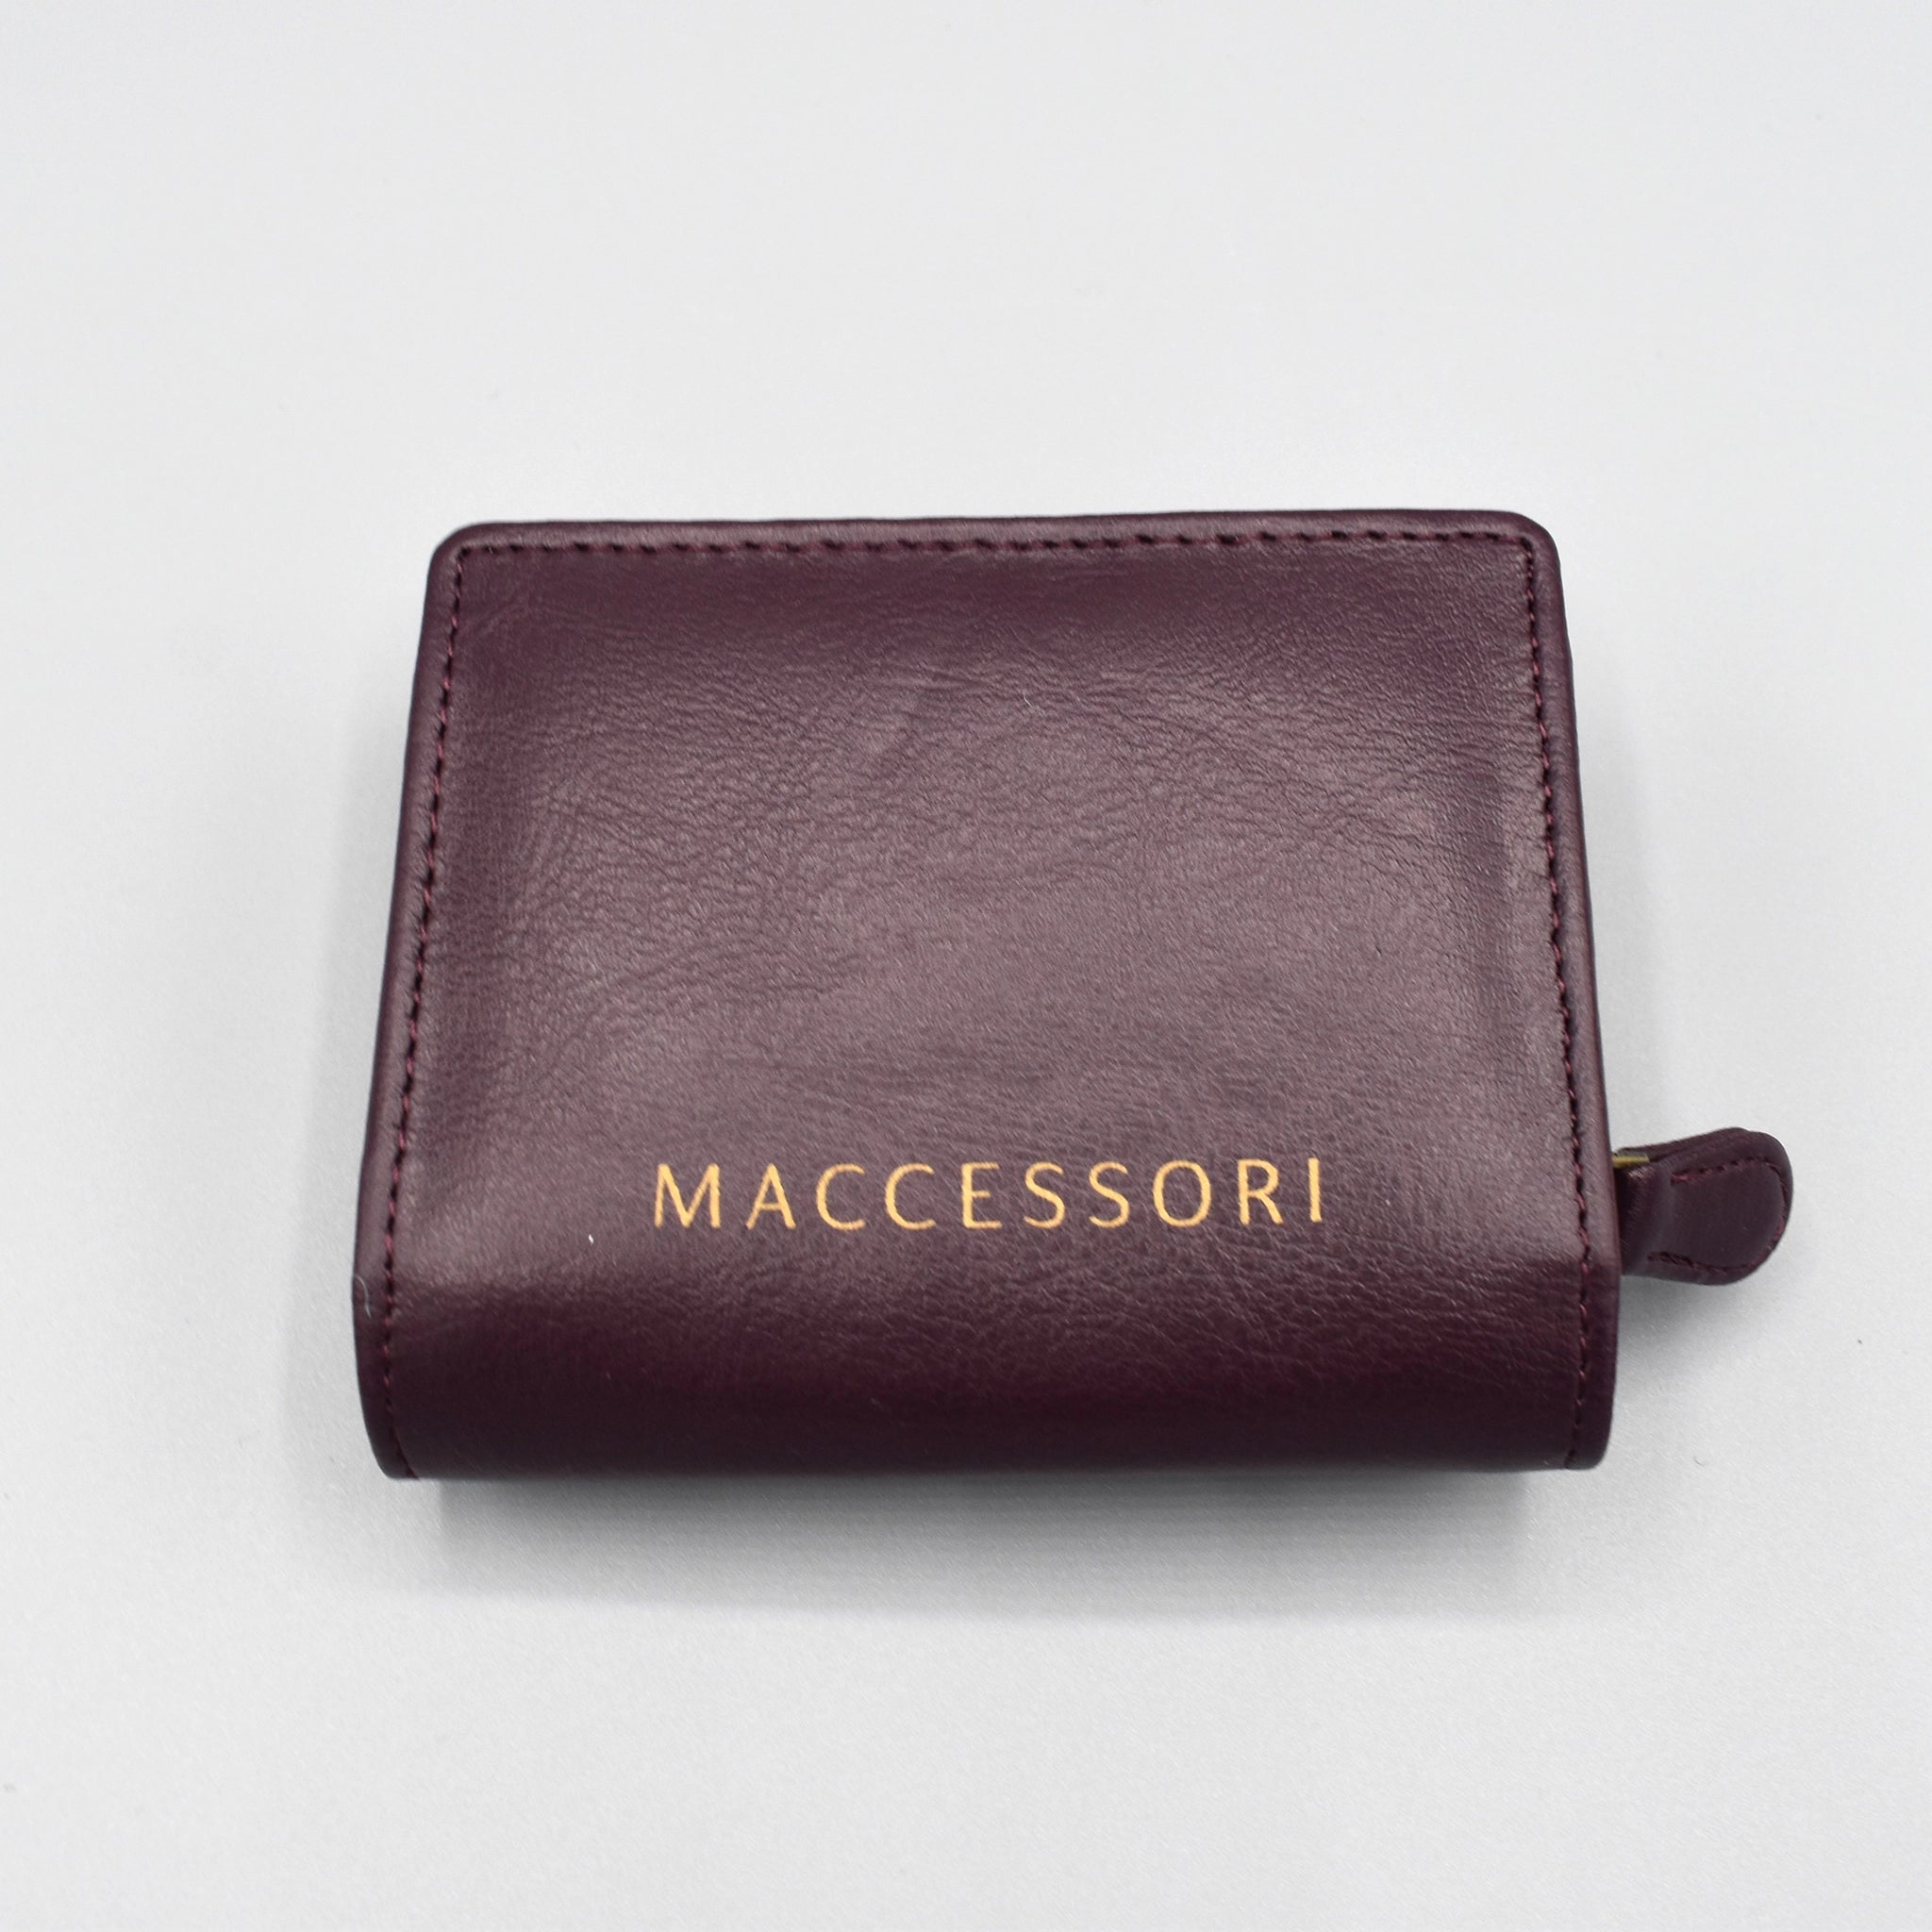 the back of a purple faux leather purse with the MACCESSORI logo in gold